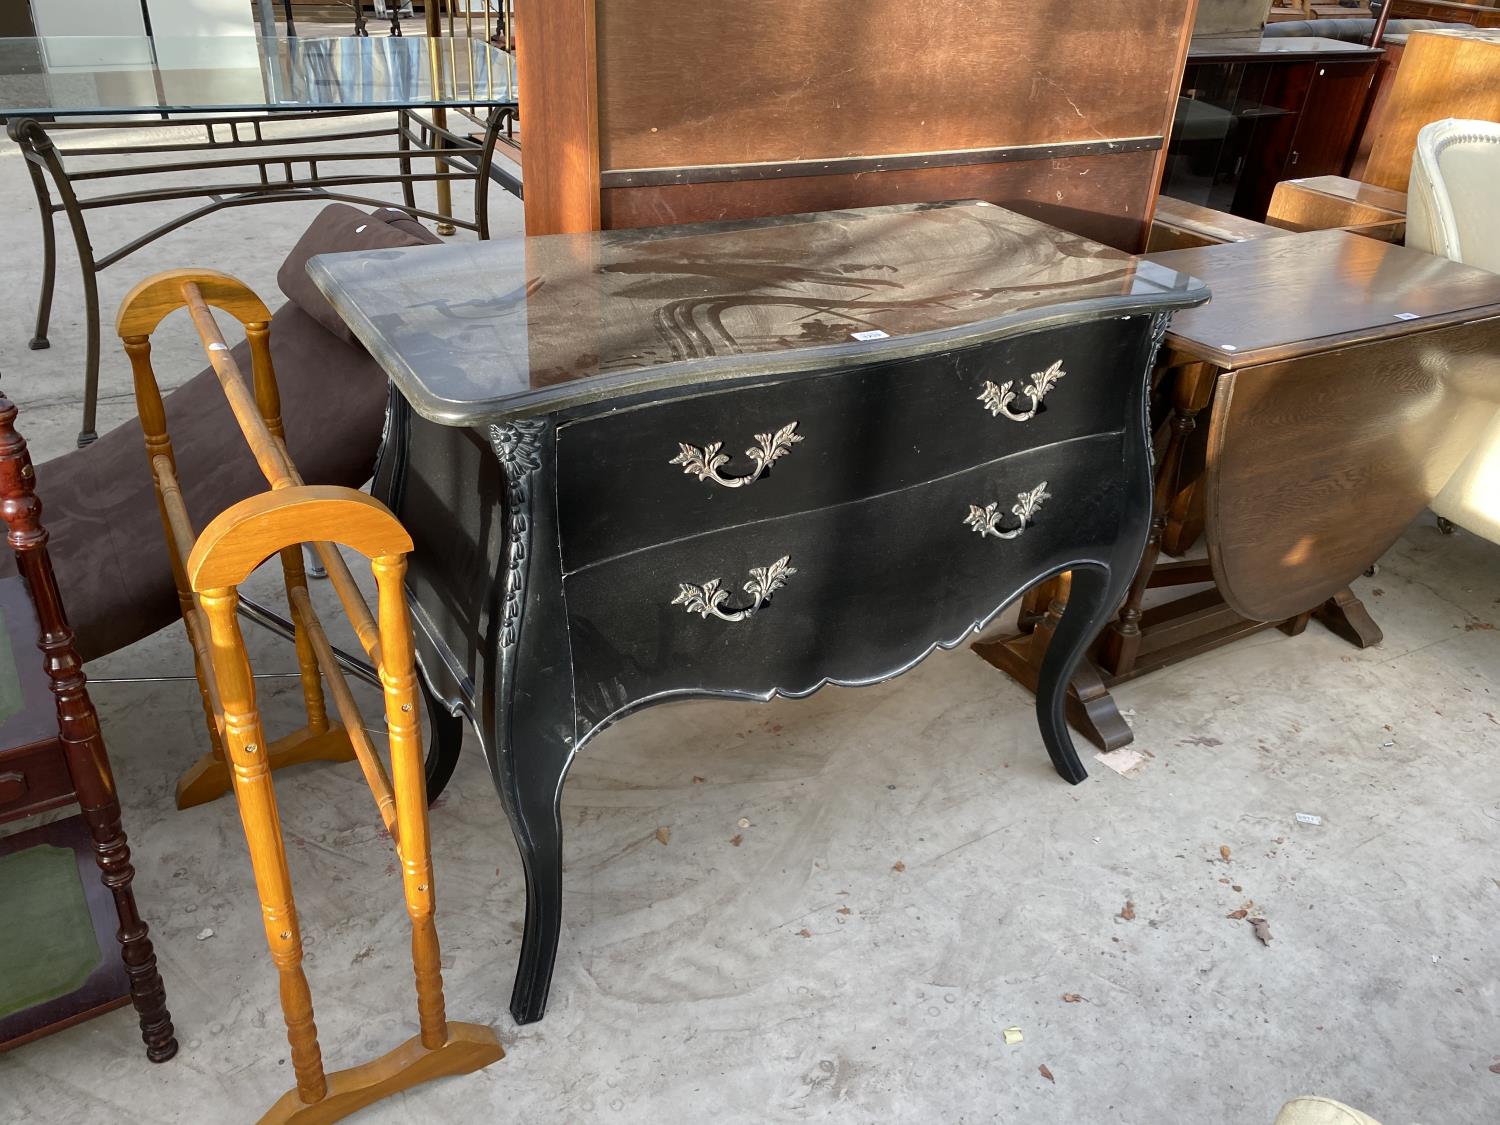 AN ORNATE BLACK CHEST OF DRAWERS WITH TWO LONG DRAWERS